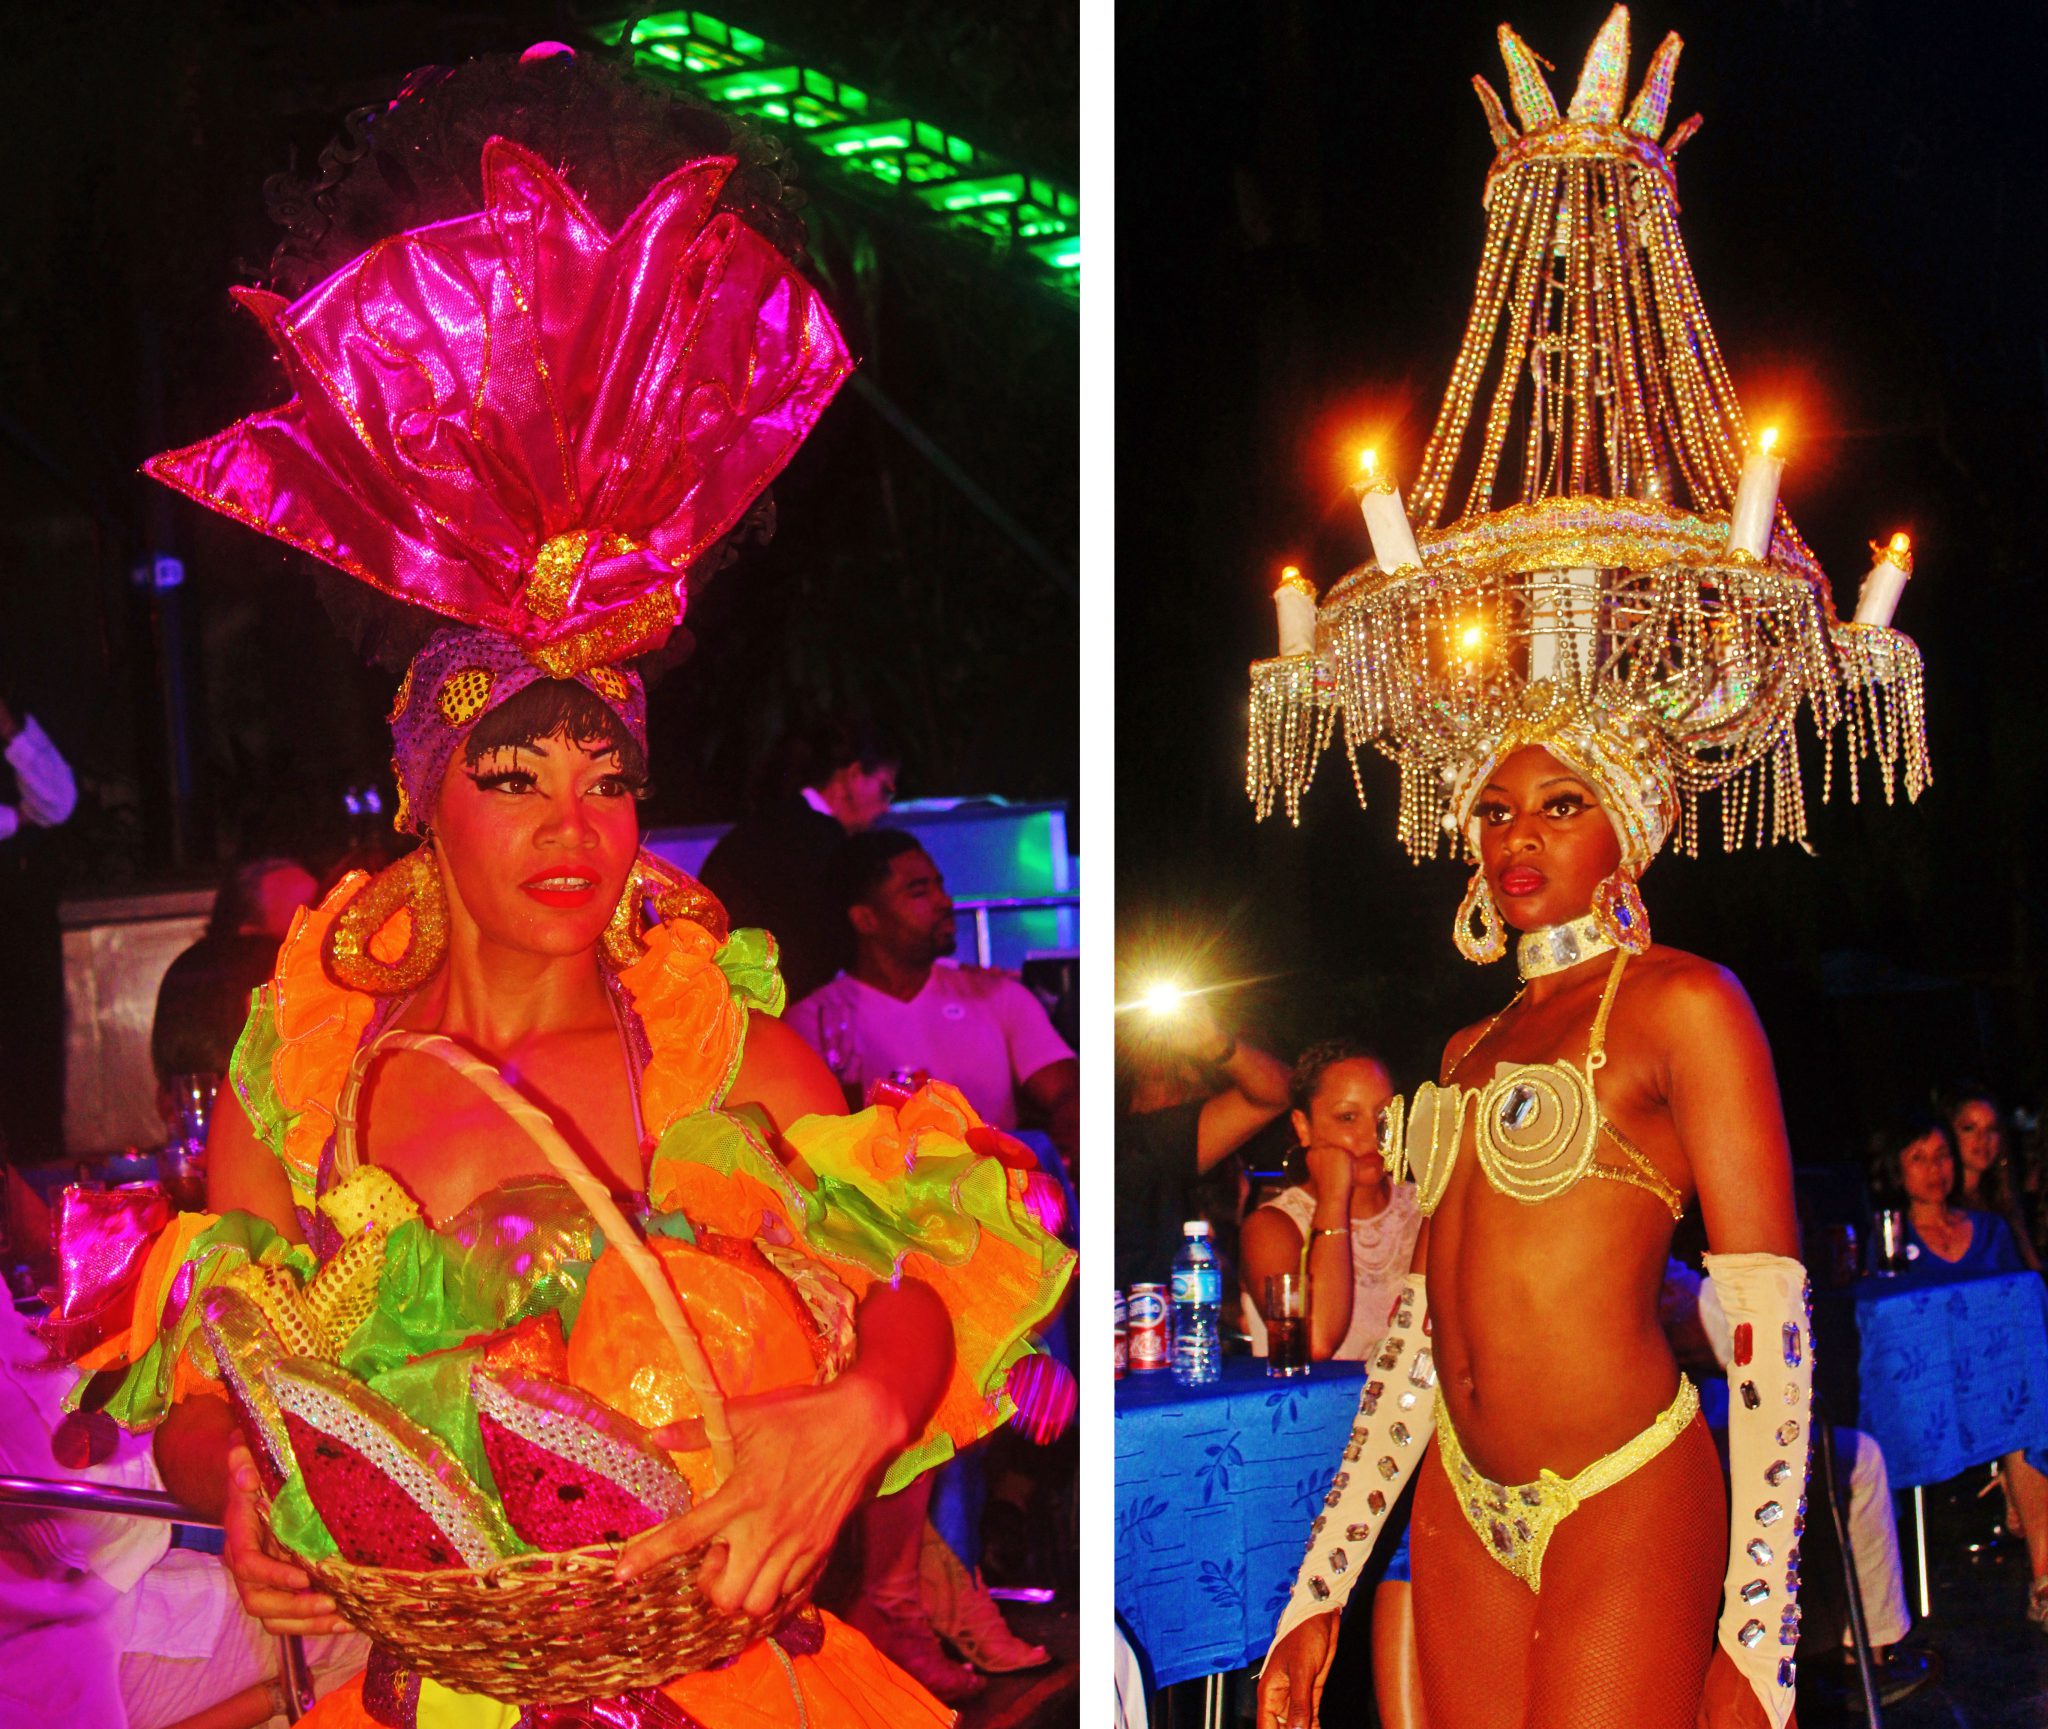 From XMAS bouquets and fruit baskets to chandeliers, the Tropicana dancers provided guests with an up-close-and-personal showcase of their exotic head wear and costumes.